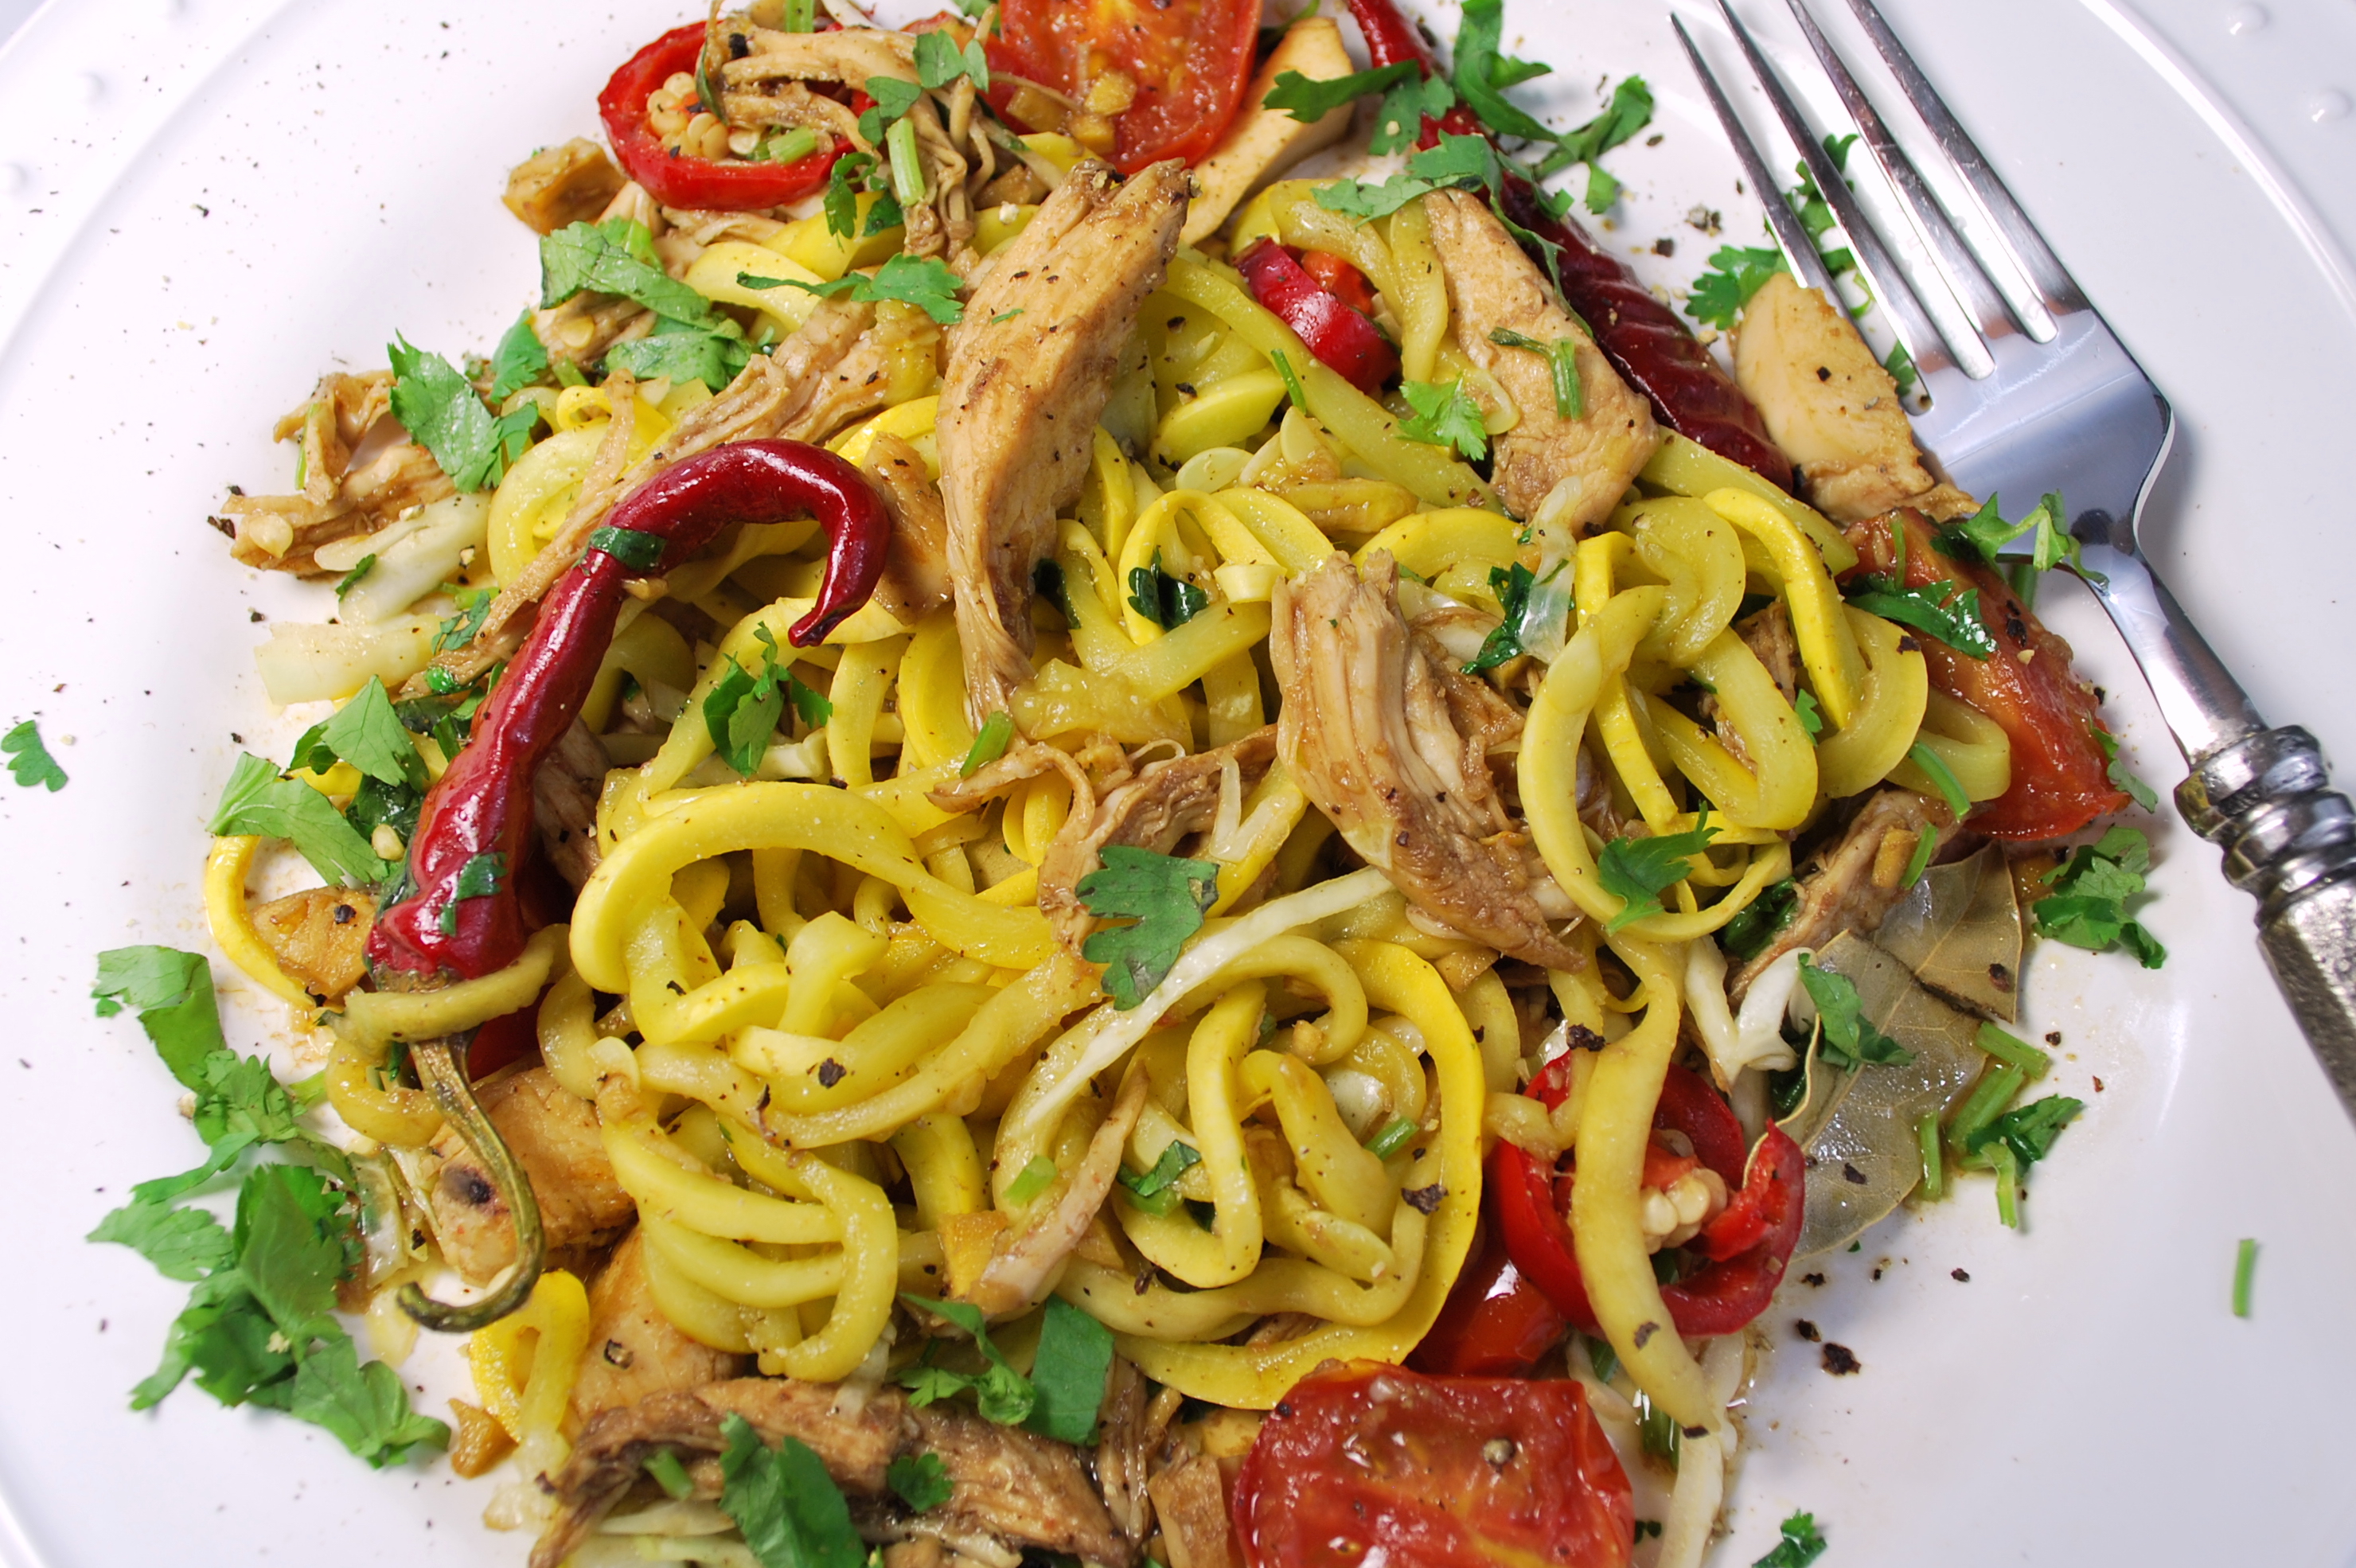 spiralizing recipes - paderno, weight-loss - drunken noodles with chicken